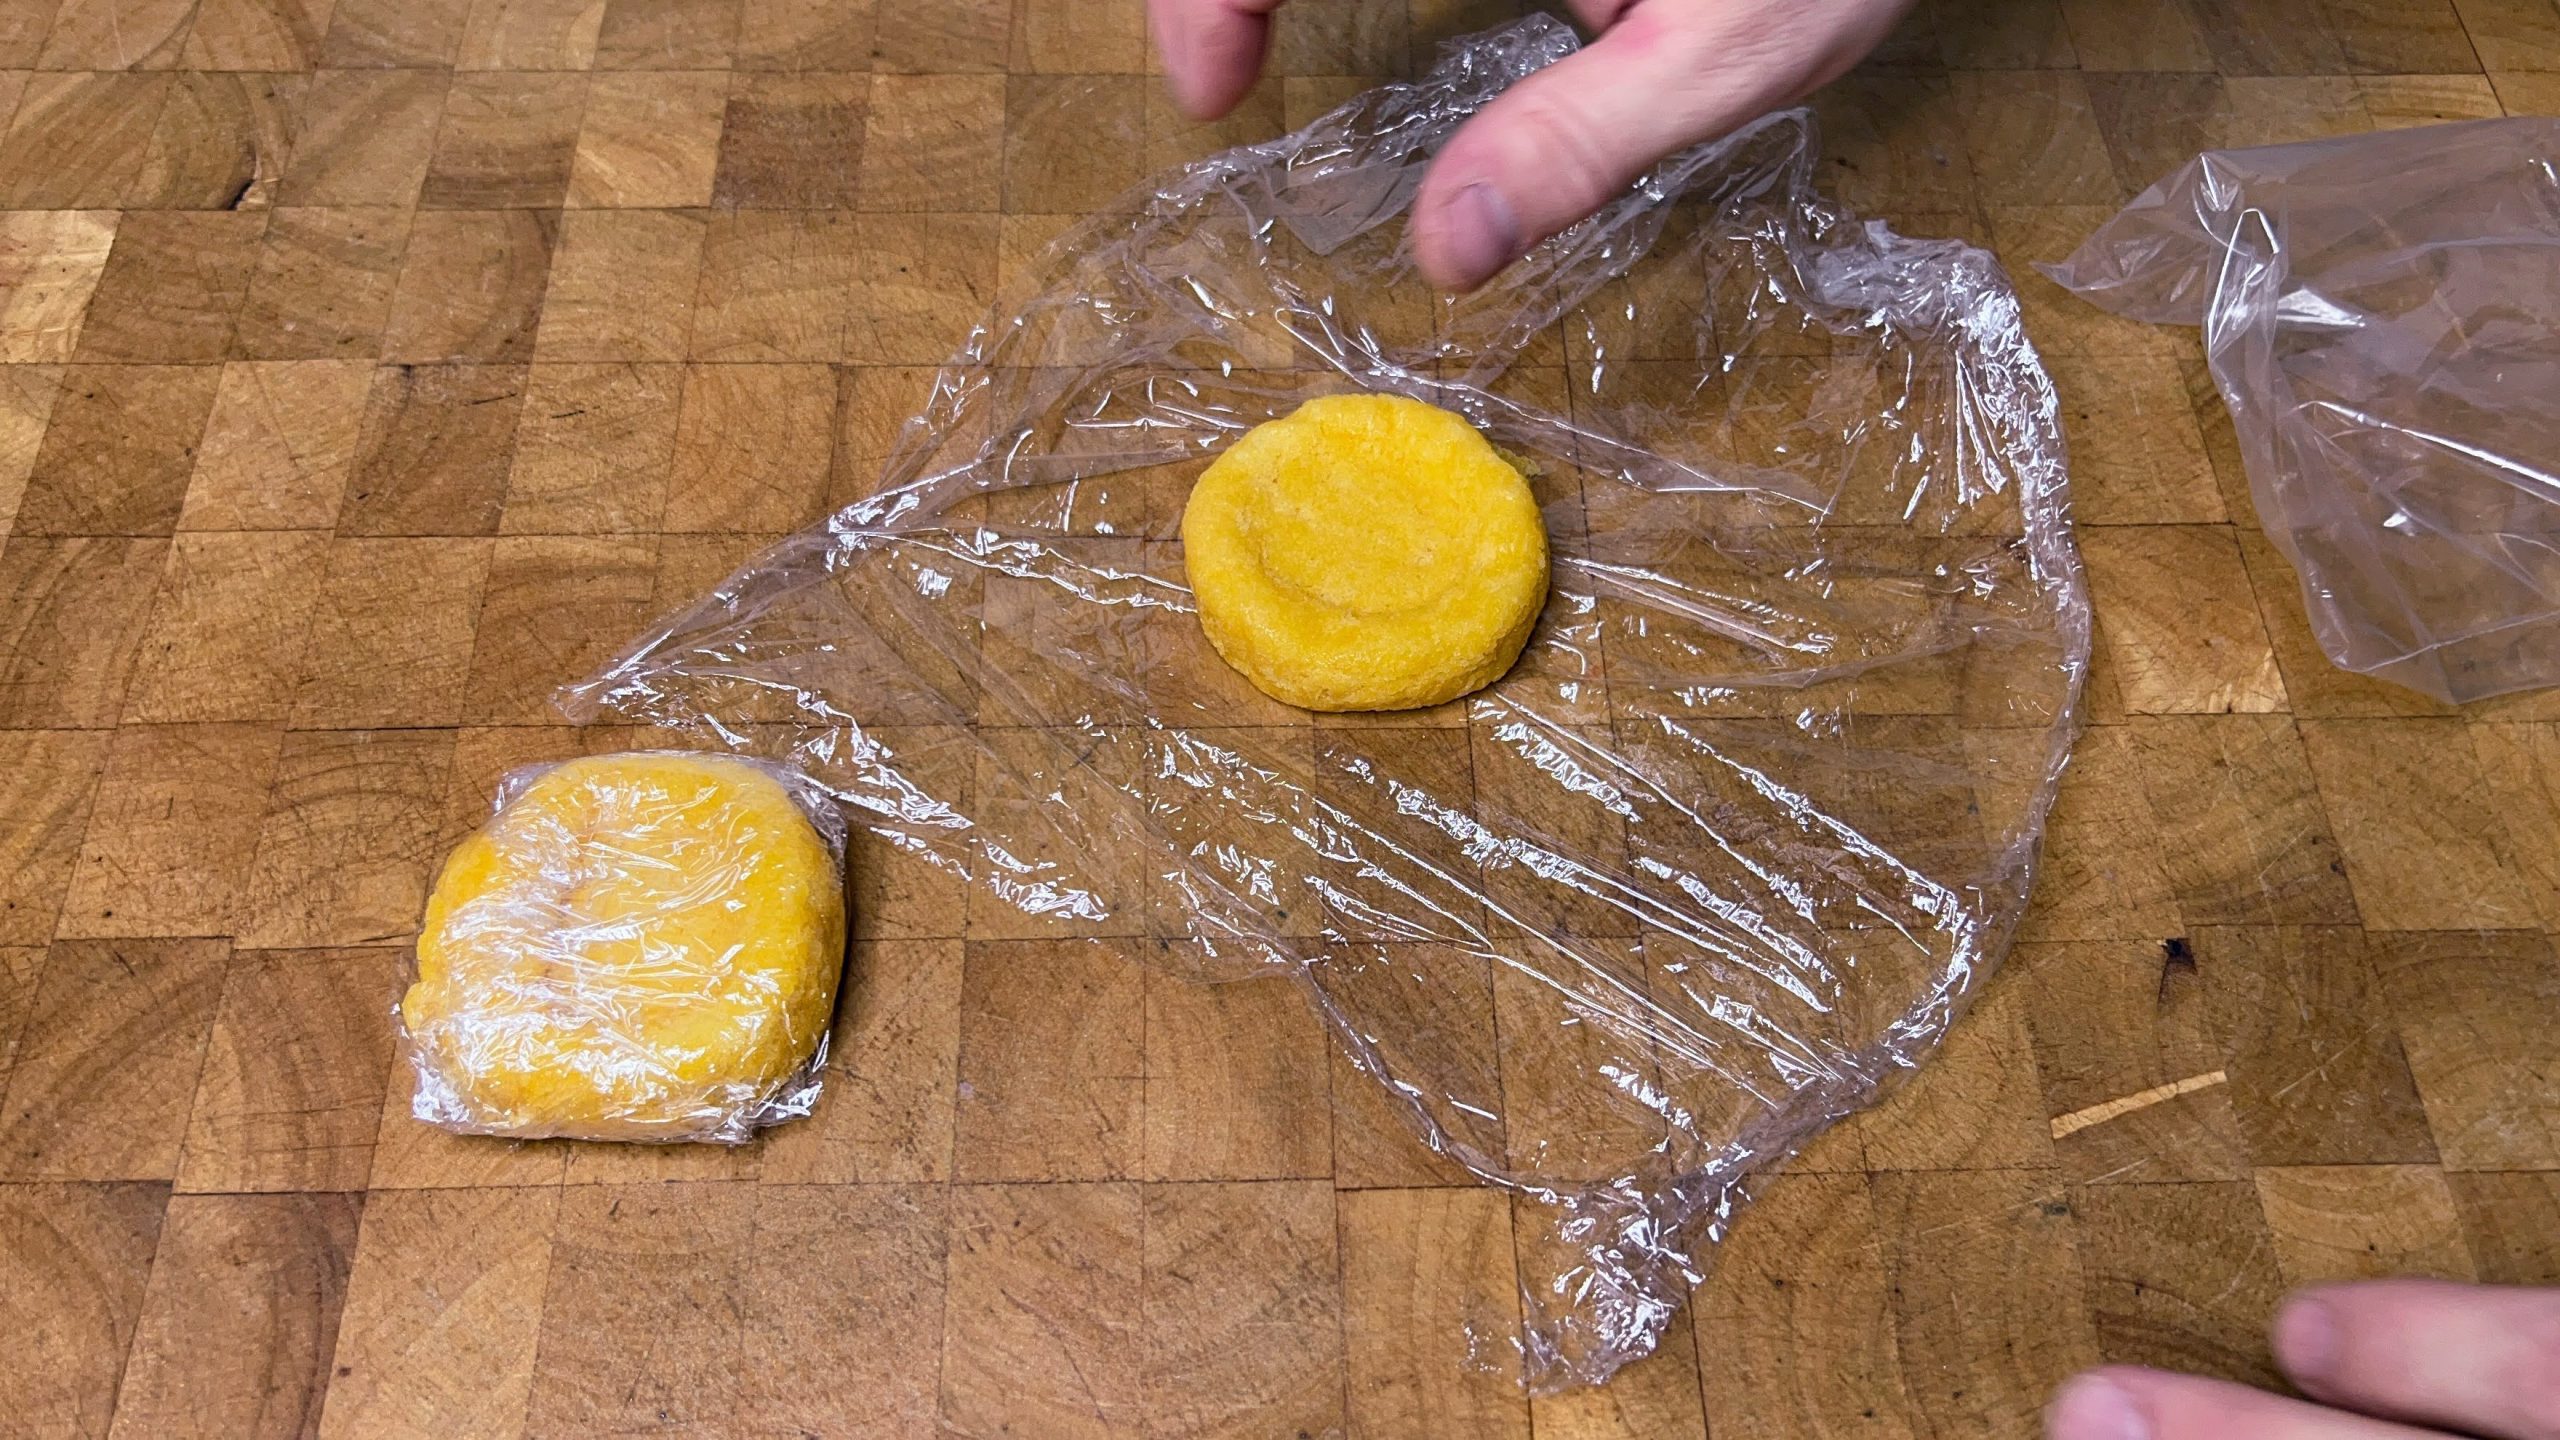 two sponge cakes sitting on plastic wrap on a wooden table